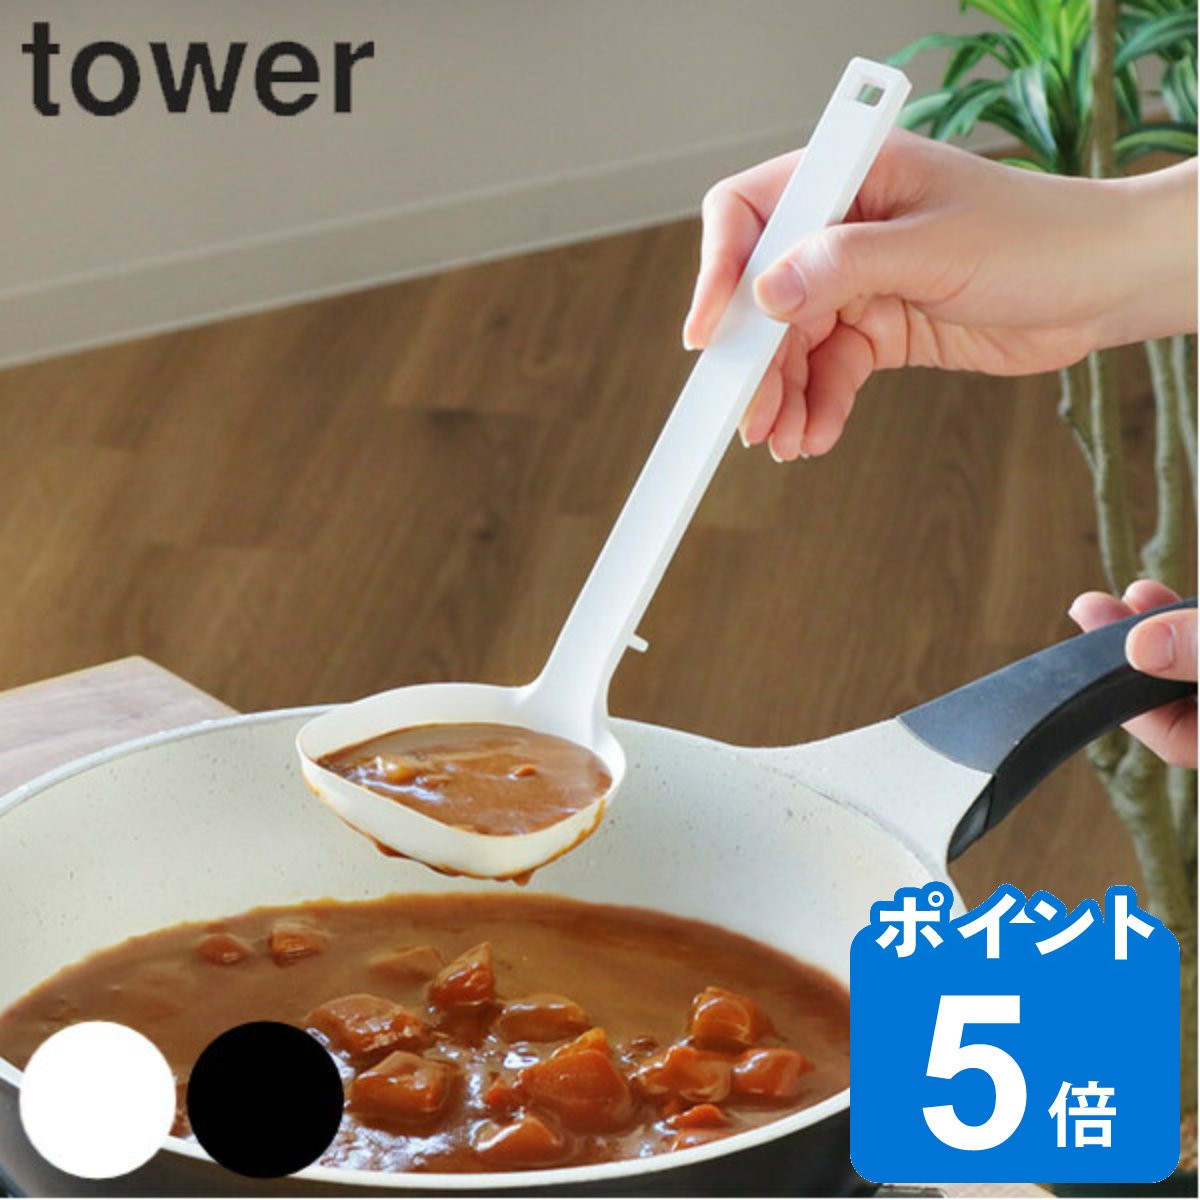 tower  VR[ ^[ R VR H@Ή